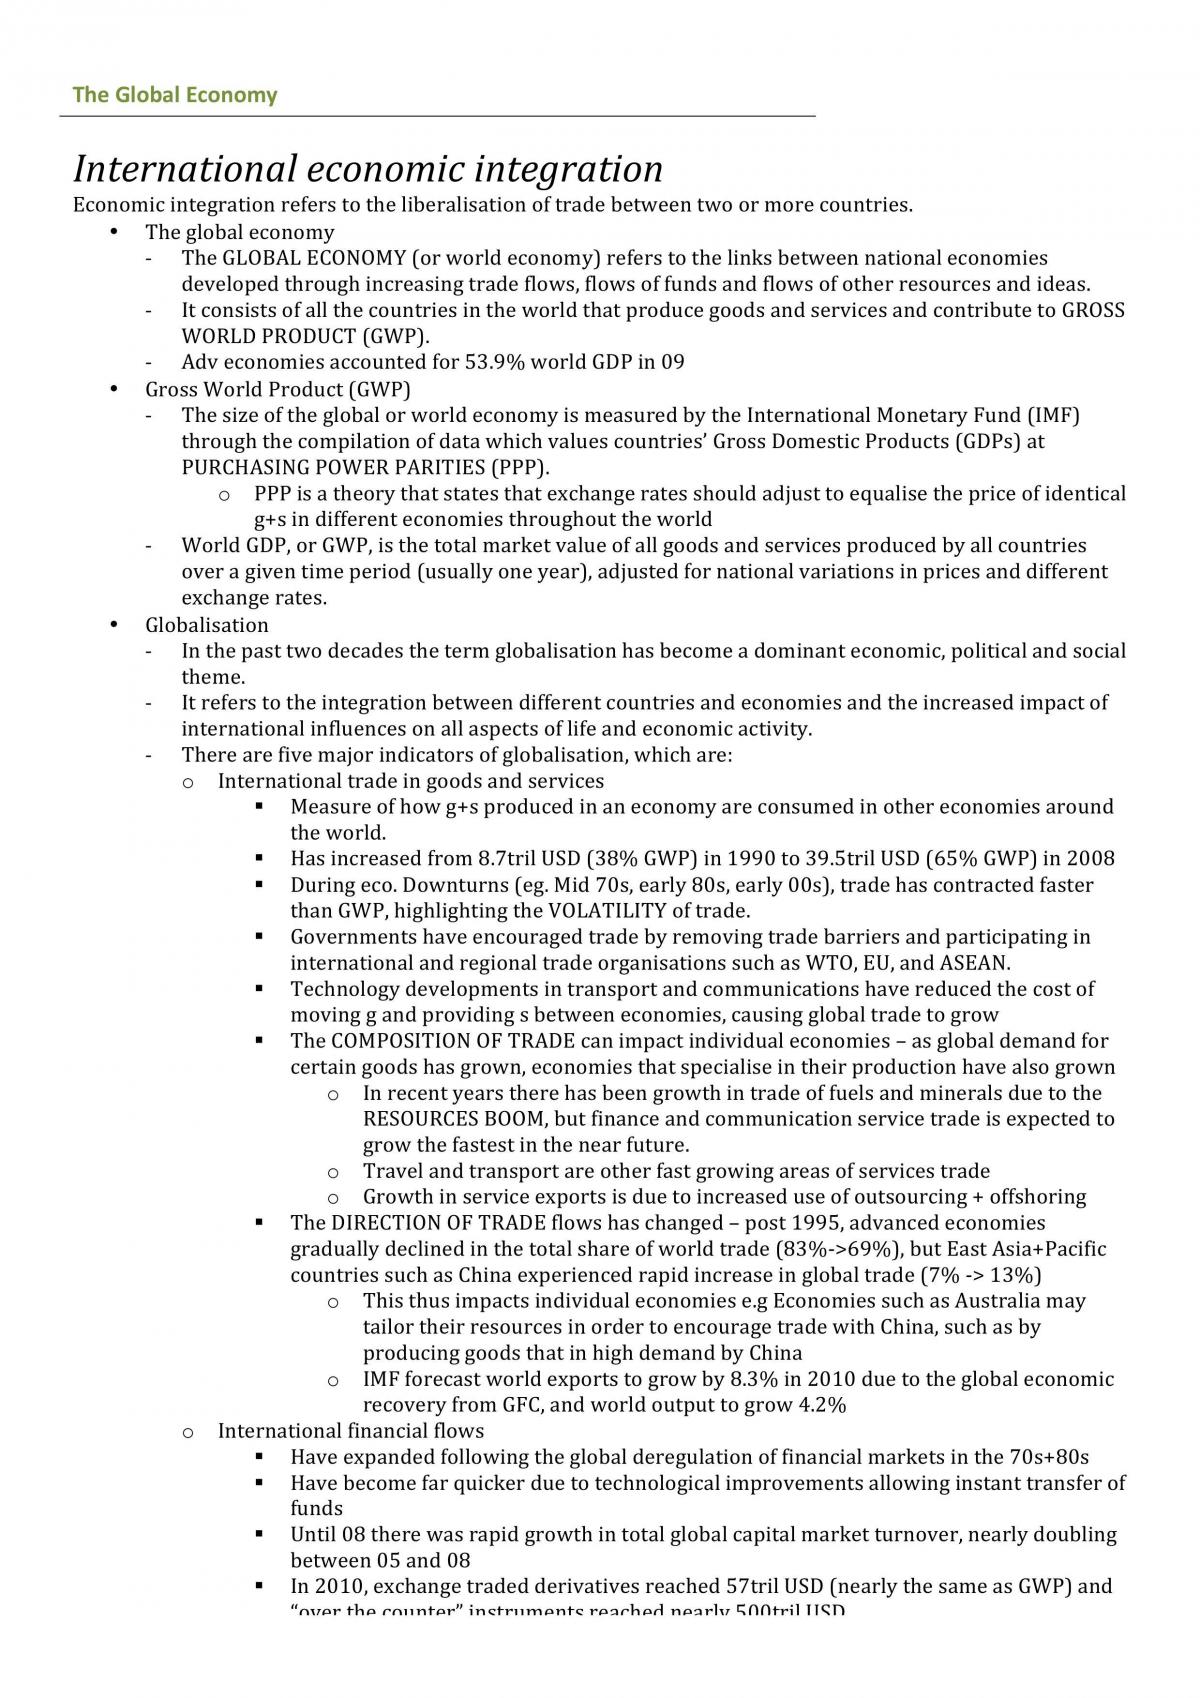 The Global Economy - Topic Notes - Page 1